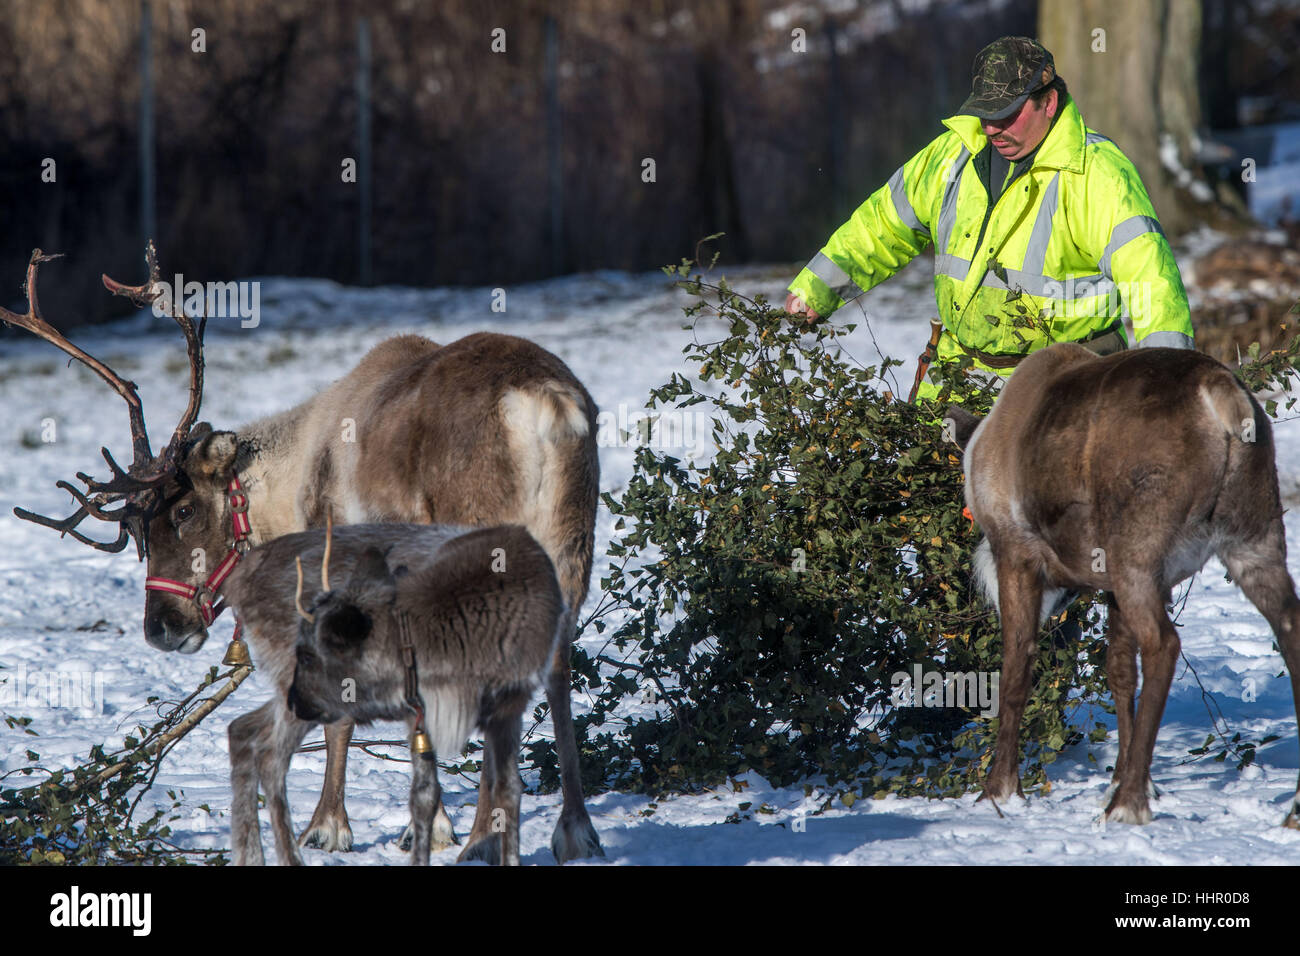 Reindeer breeder Andreas Hoffmann feeds the reindeer in one of the enclosures at their reindeer farm in Strasen near Wesenberg, Germany, 16 January 2017. The reindeer in the Mecklenburg Lake District feel almost at home in Lapland with the current winter weather. Since 2009 the deer, which are used to extreme cold and are actually home to the tundra, are being bred professionally. Over the next years the herd will grow from 30 to 50 animals, and then reindeer meat sausages will be produced that are to be sold in the farm store. Photo: Jens Büttner/dpa-Zentralbild/dpa Stock Photo